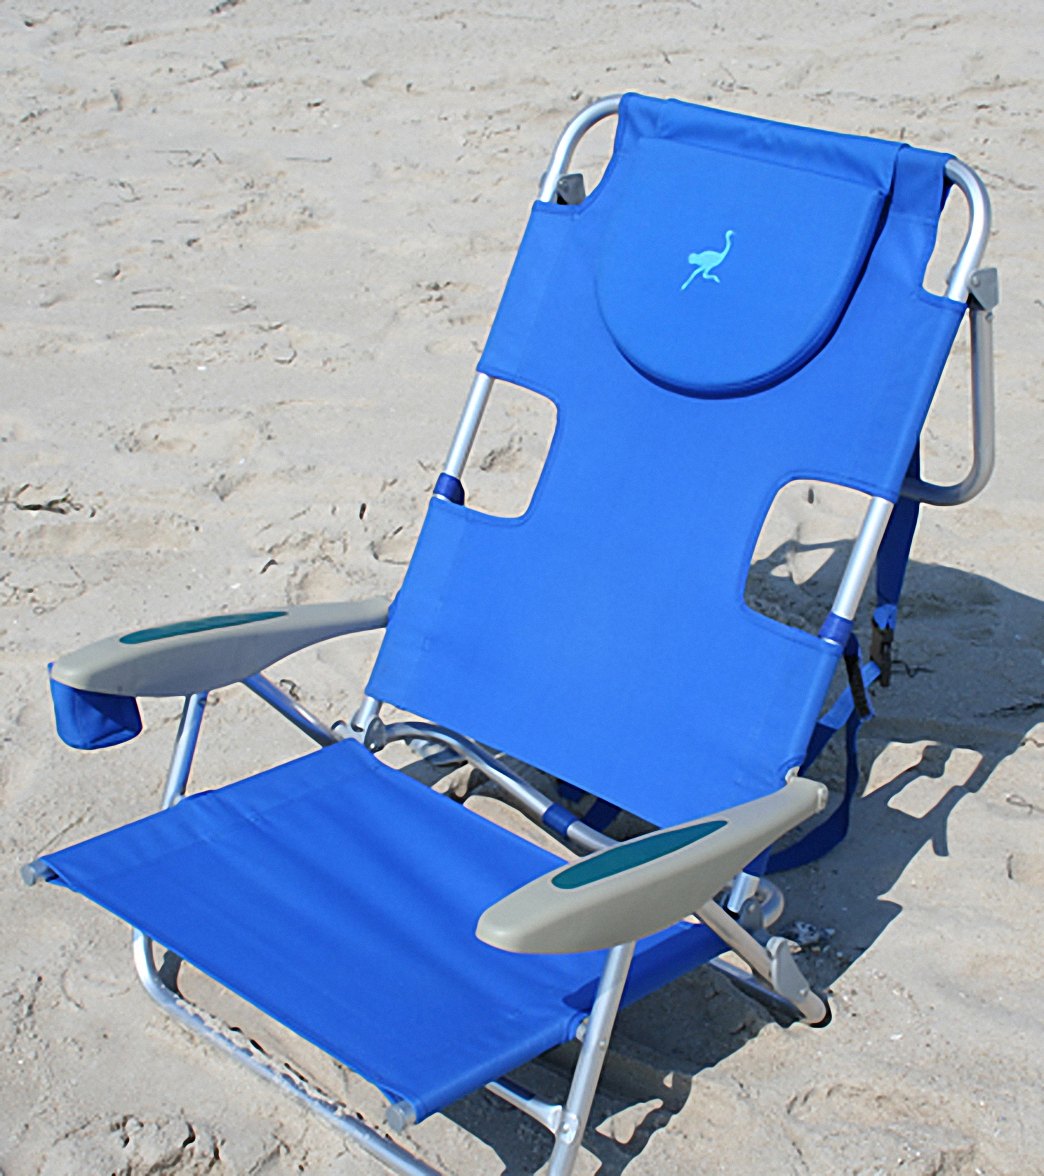 Creatice Beach Chair With Backpack Straps for Large Space